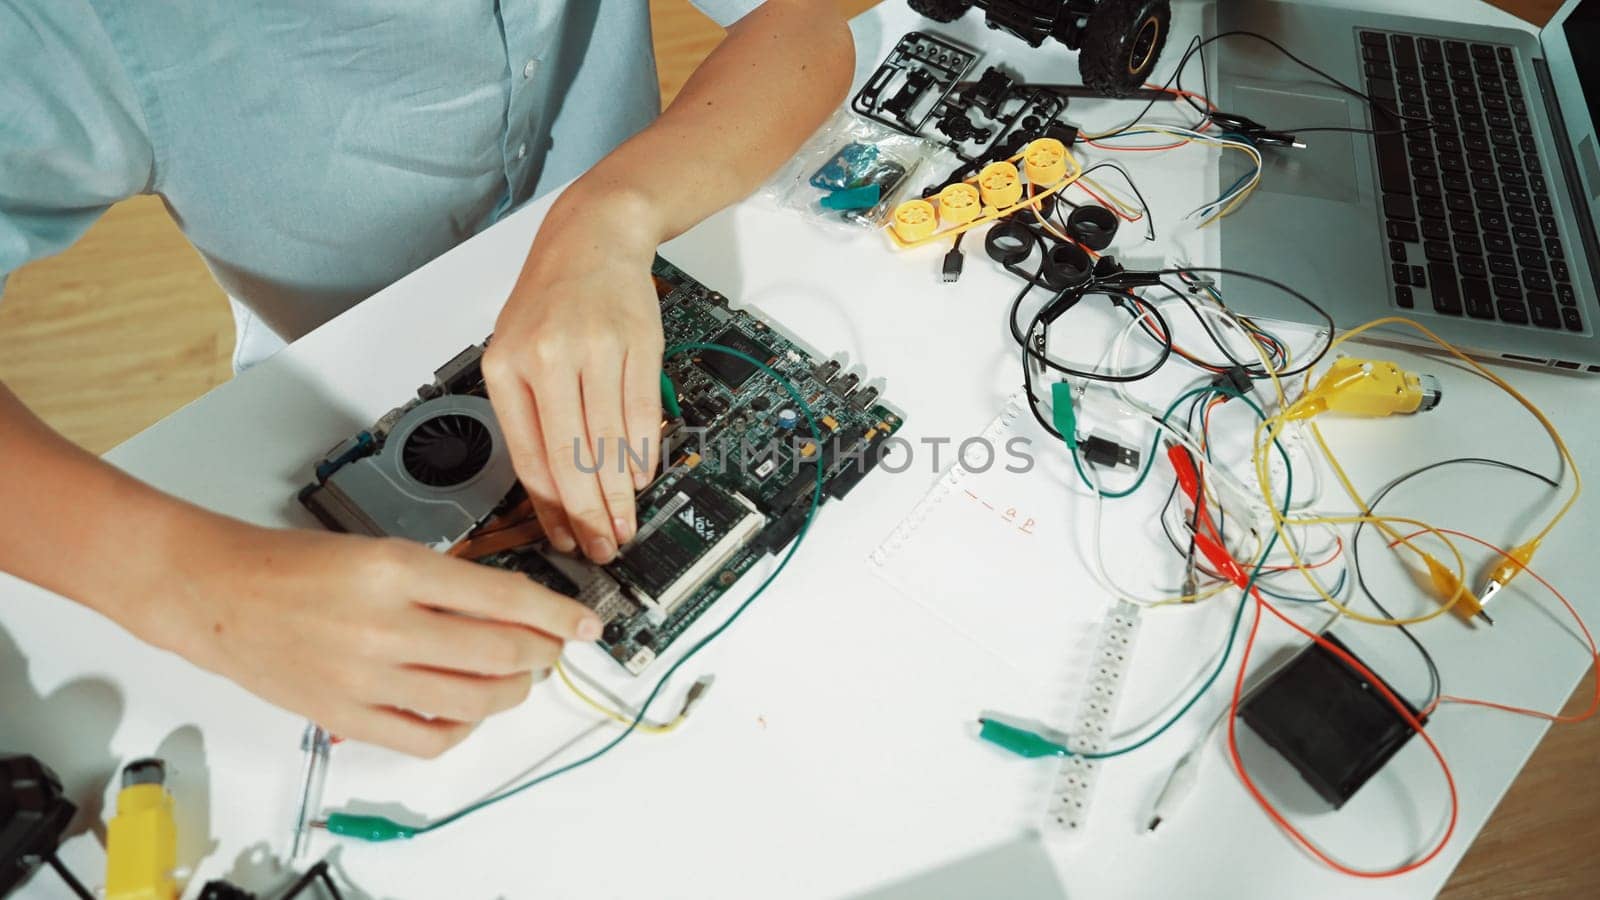 Closeup of boy hand fixing motherboard with electronic tool on table. Top view of highschool student repair electric board with electronic equipment, wires tool scatter around on table. Edification.